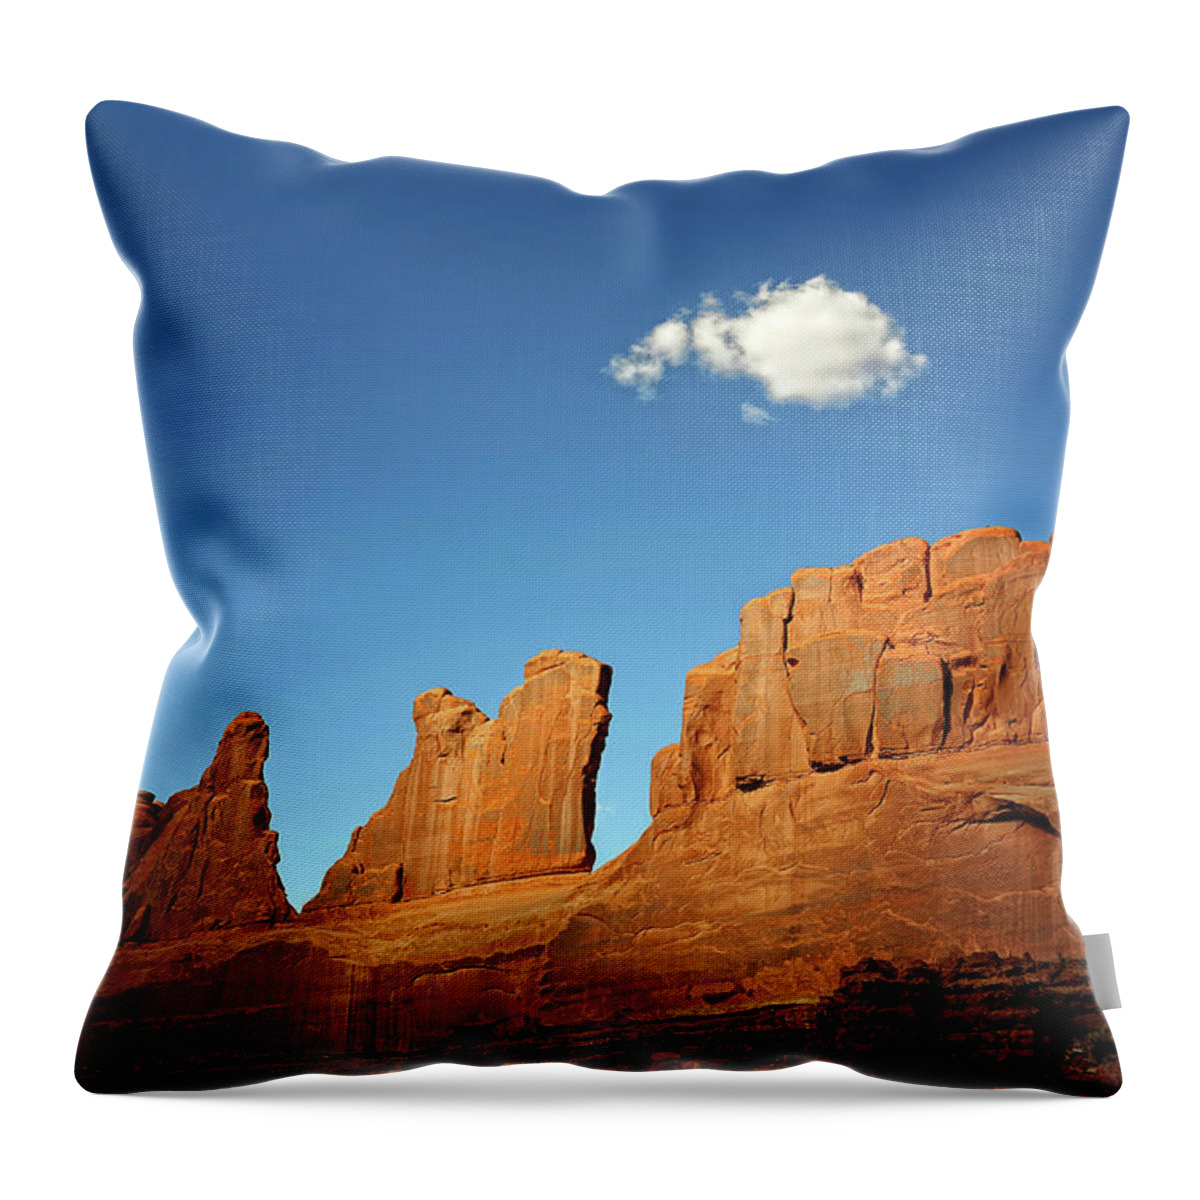 Tranquility Throw Pillow featuring the photograph Park Avenue by Philippe Sainte-laudy Photography